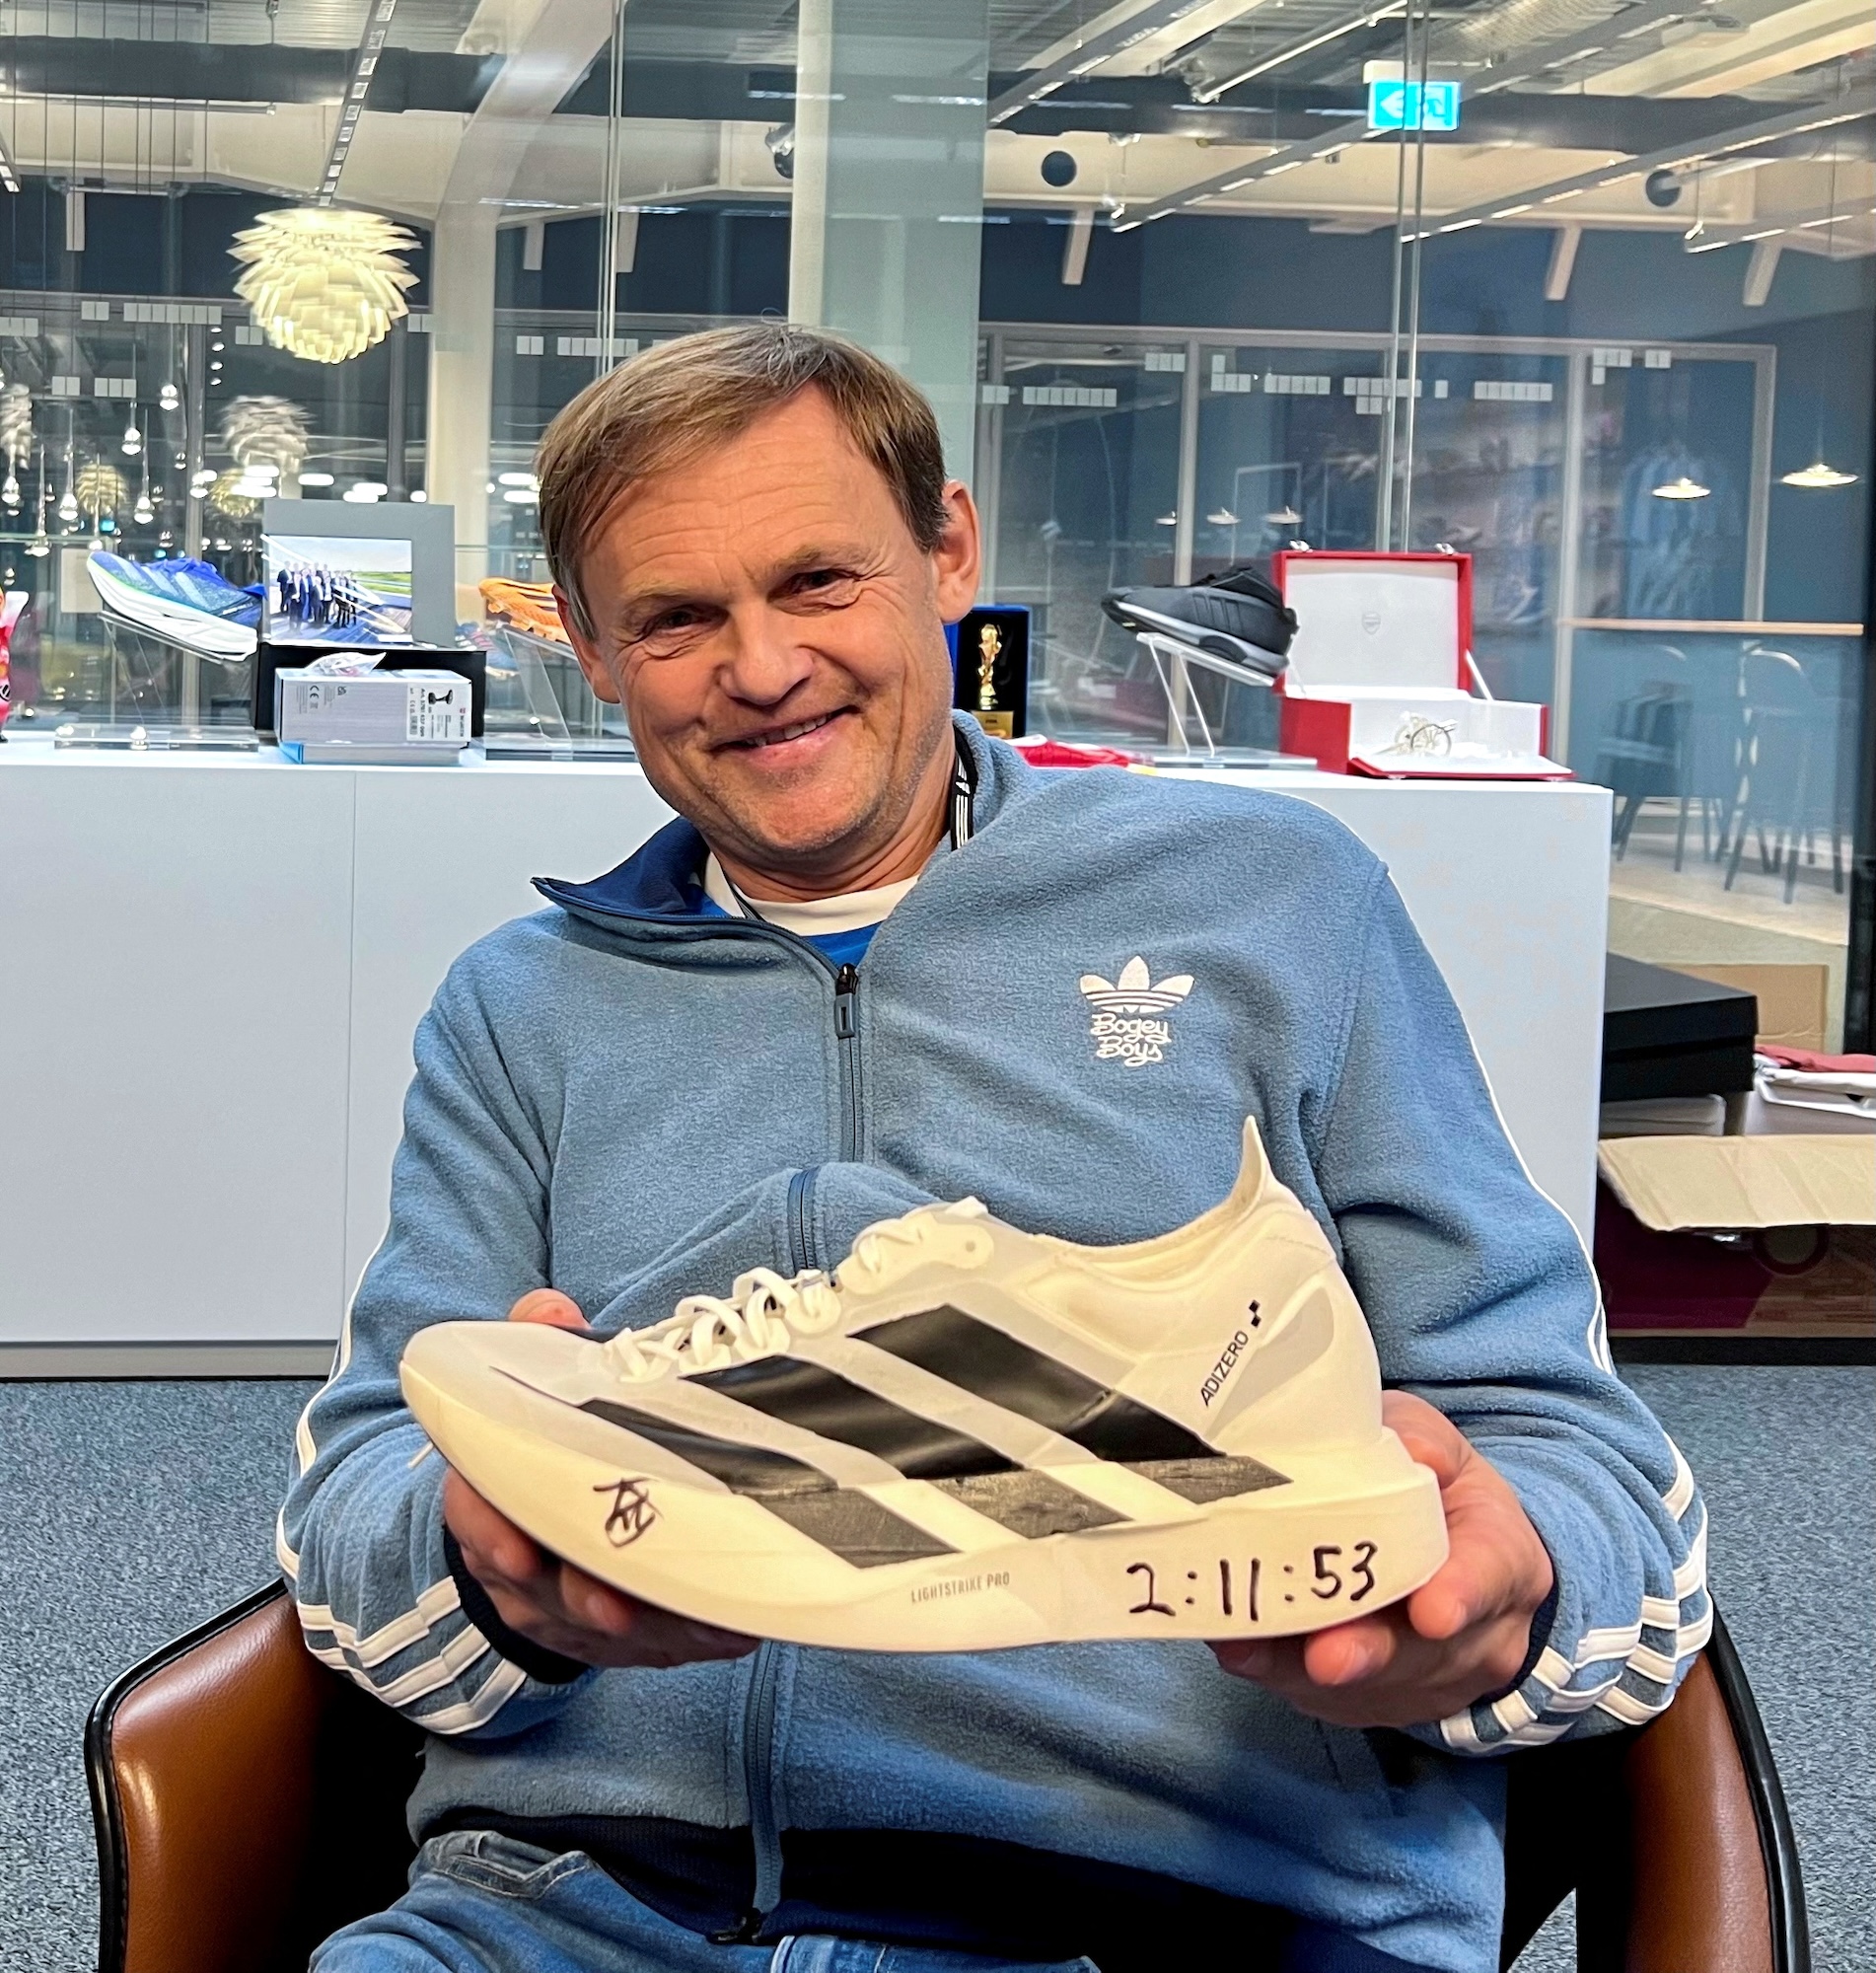 Adidas CEO Bjorn Gulden, holds a shoe worn by Ethiopia's Tigist Assefa when she set a new women's world record at the Berlin Marathon, finishing in 2 hours, 11 minutes and 53 seconds, during an interview at Adidas headquarters in Herzogenaurach, Germany, November 20, 2023. REUTERS/Helen Reid/File Photo